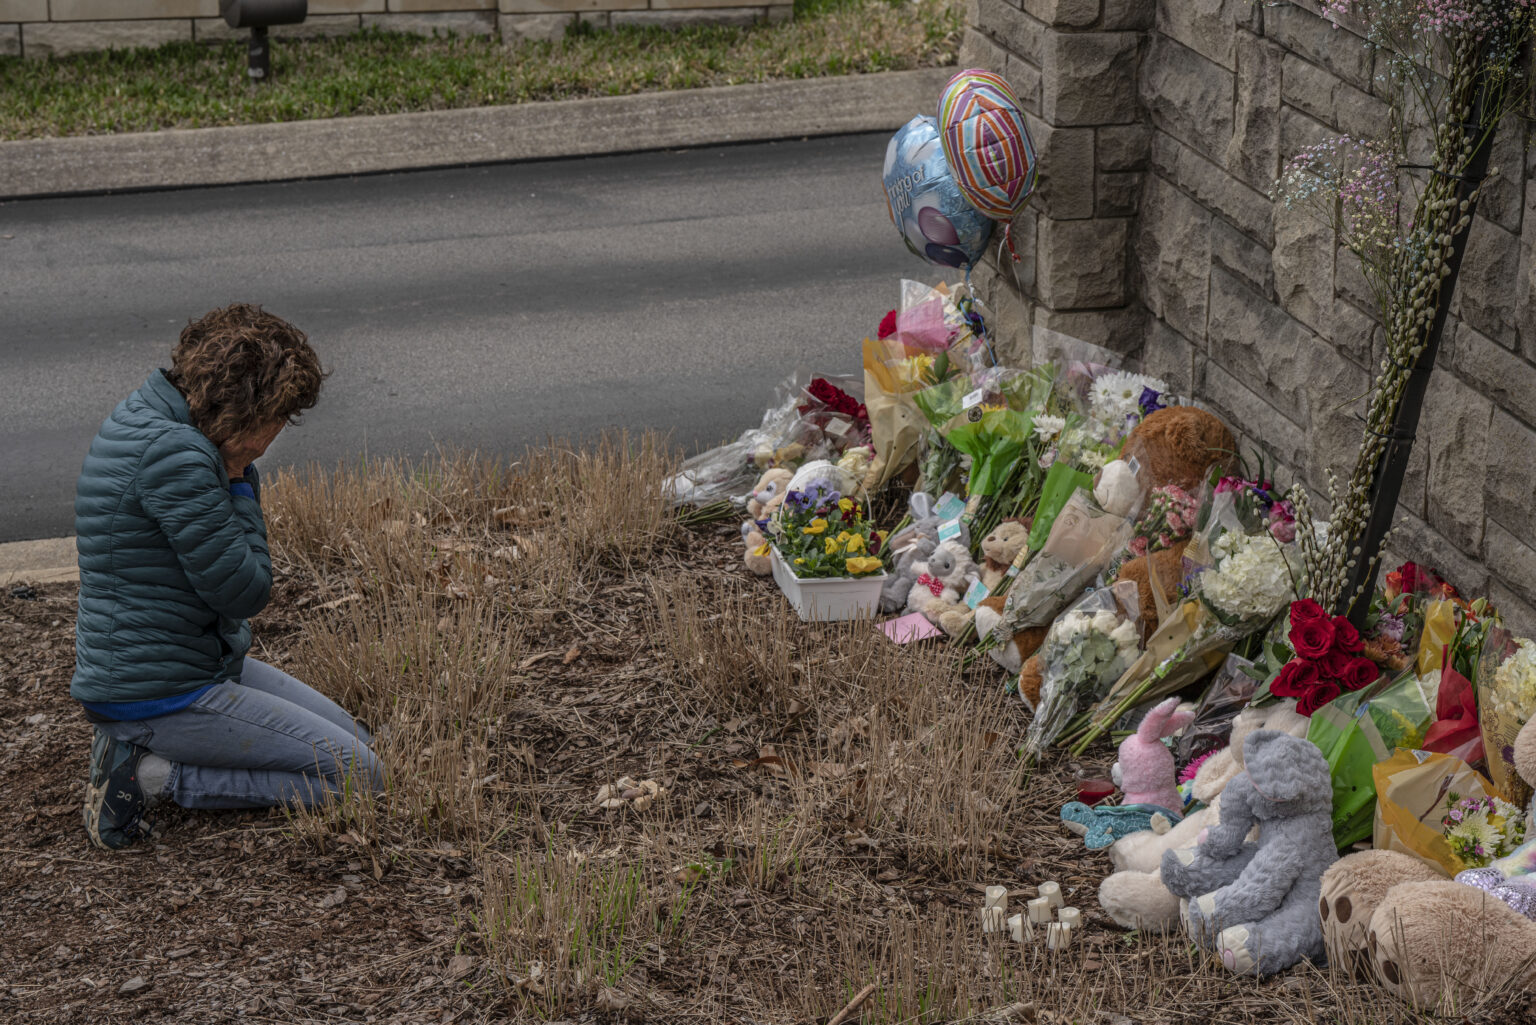 Tennessee School Drills: Person with short brown hair with head down and hands covering face kneels in dry grass in front of stone wall with flowers, suffed animals and balloons piled up against it